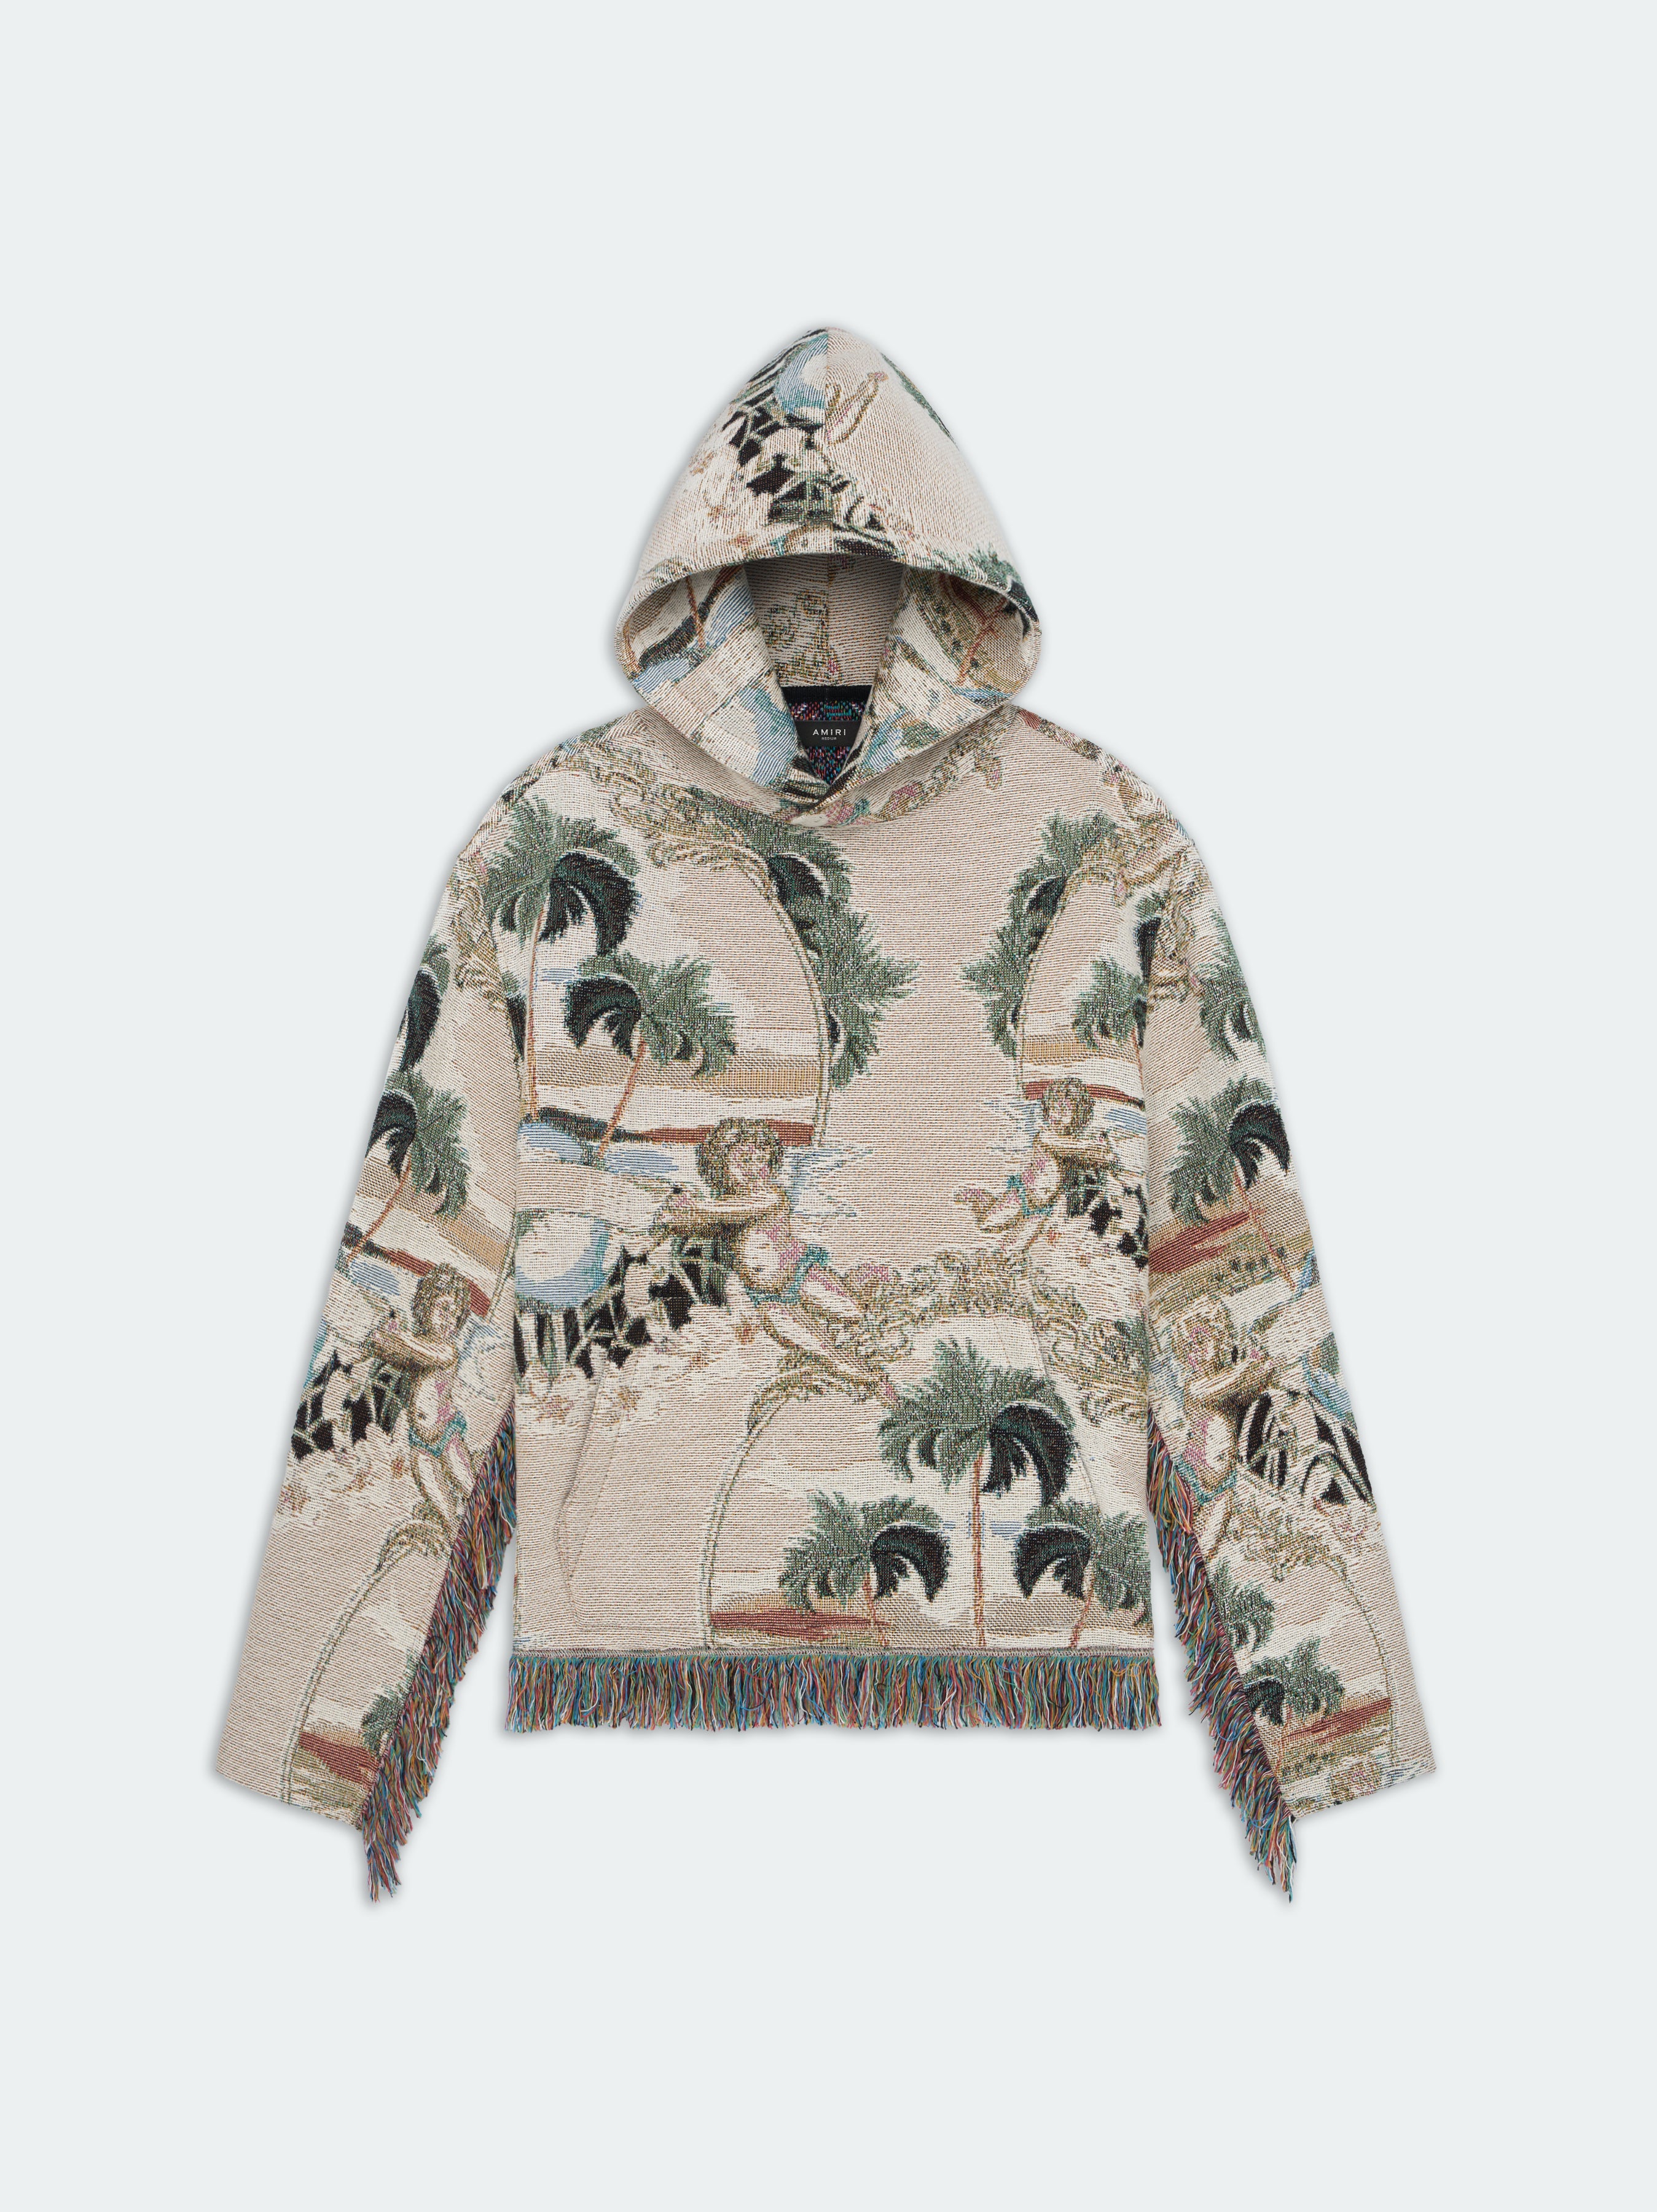 Product CHERUB PALM TAPESTRY HOODIE - White featured image